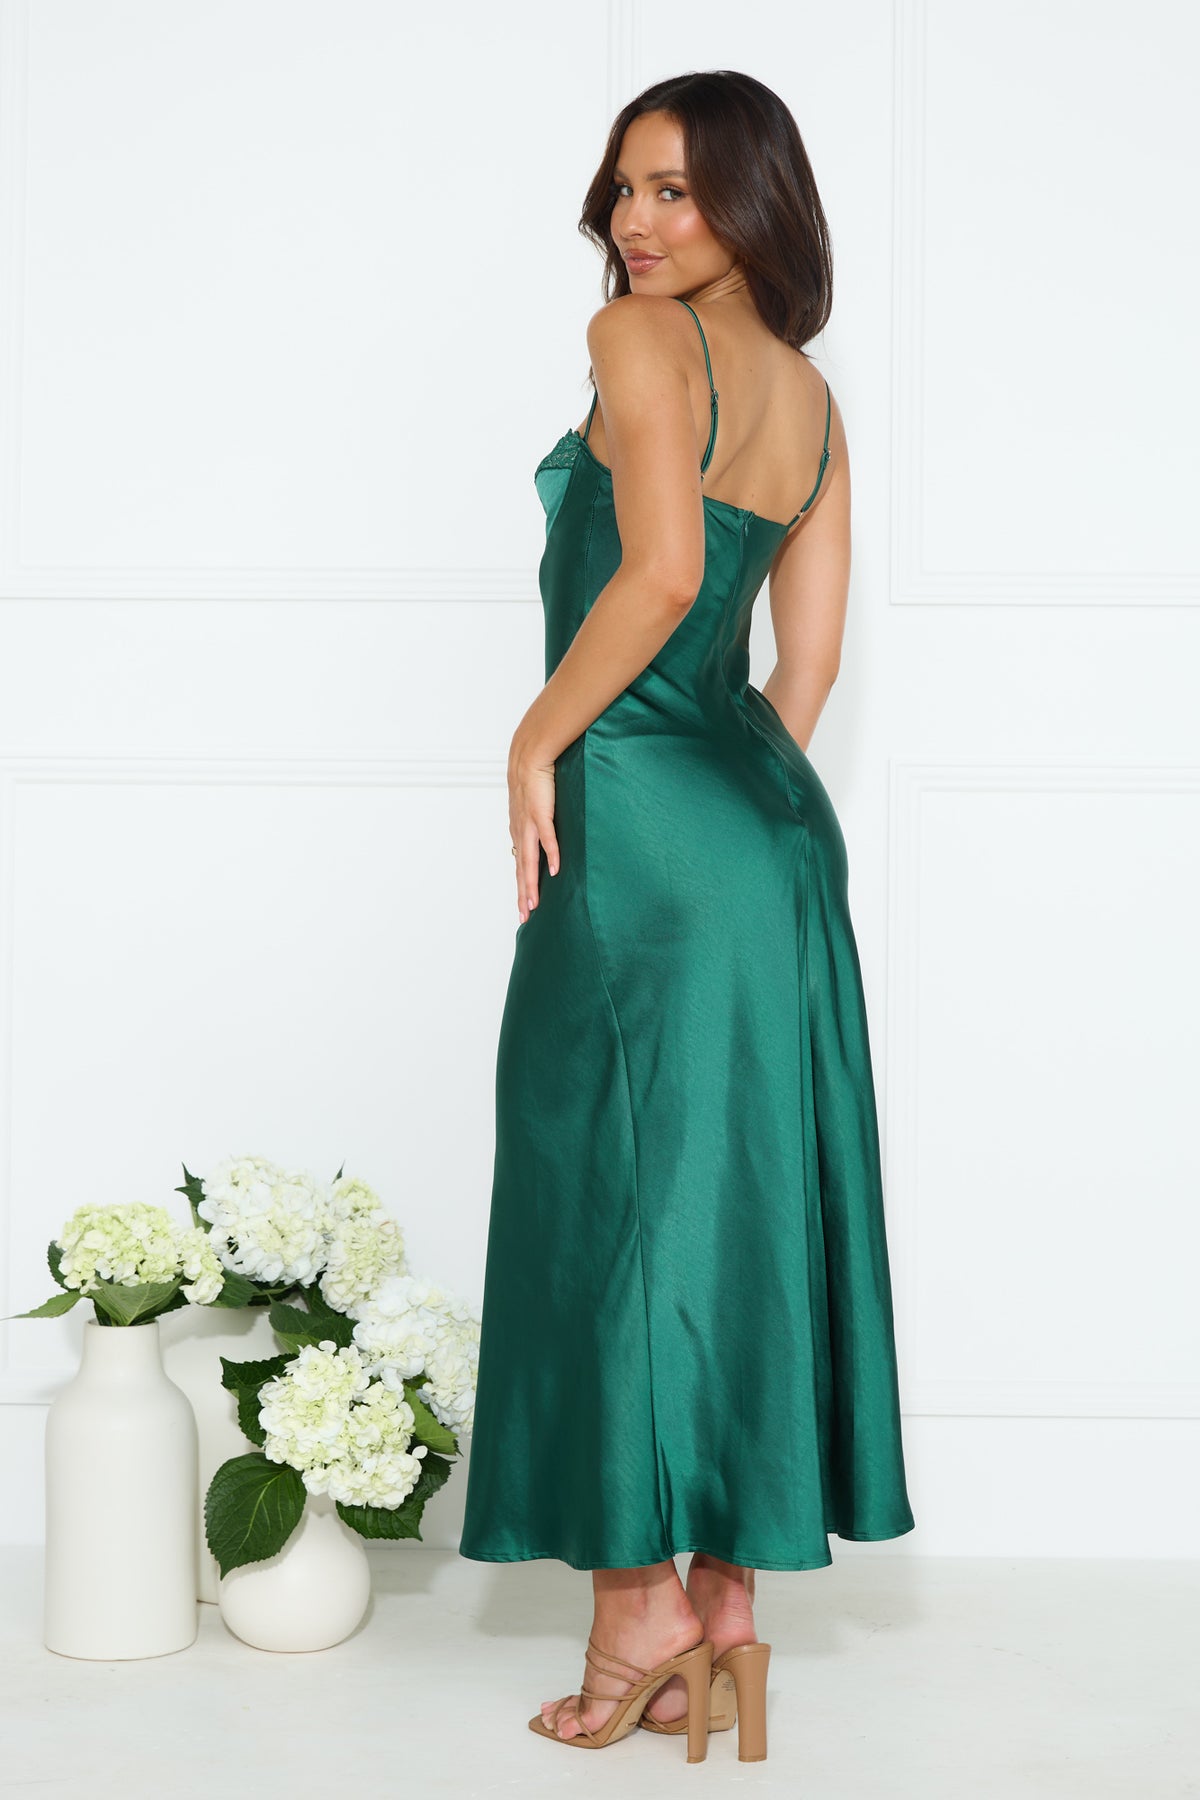 Shop Formal Dress - Filled with Passion Satin Maxi Dress Green fourth image